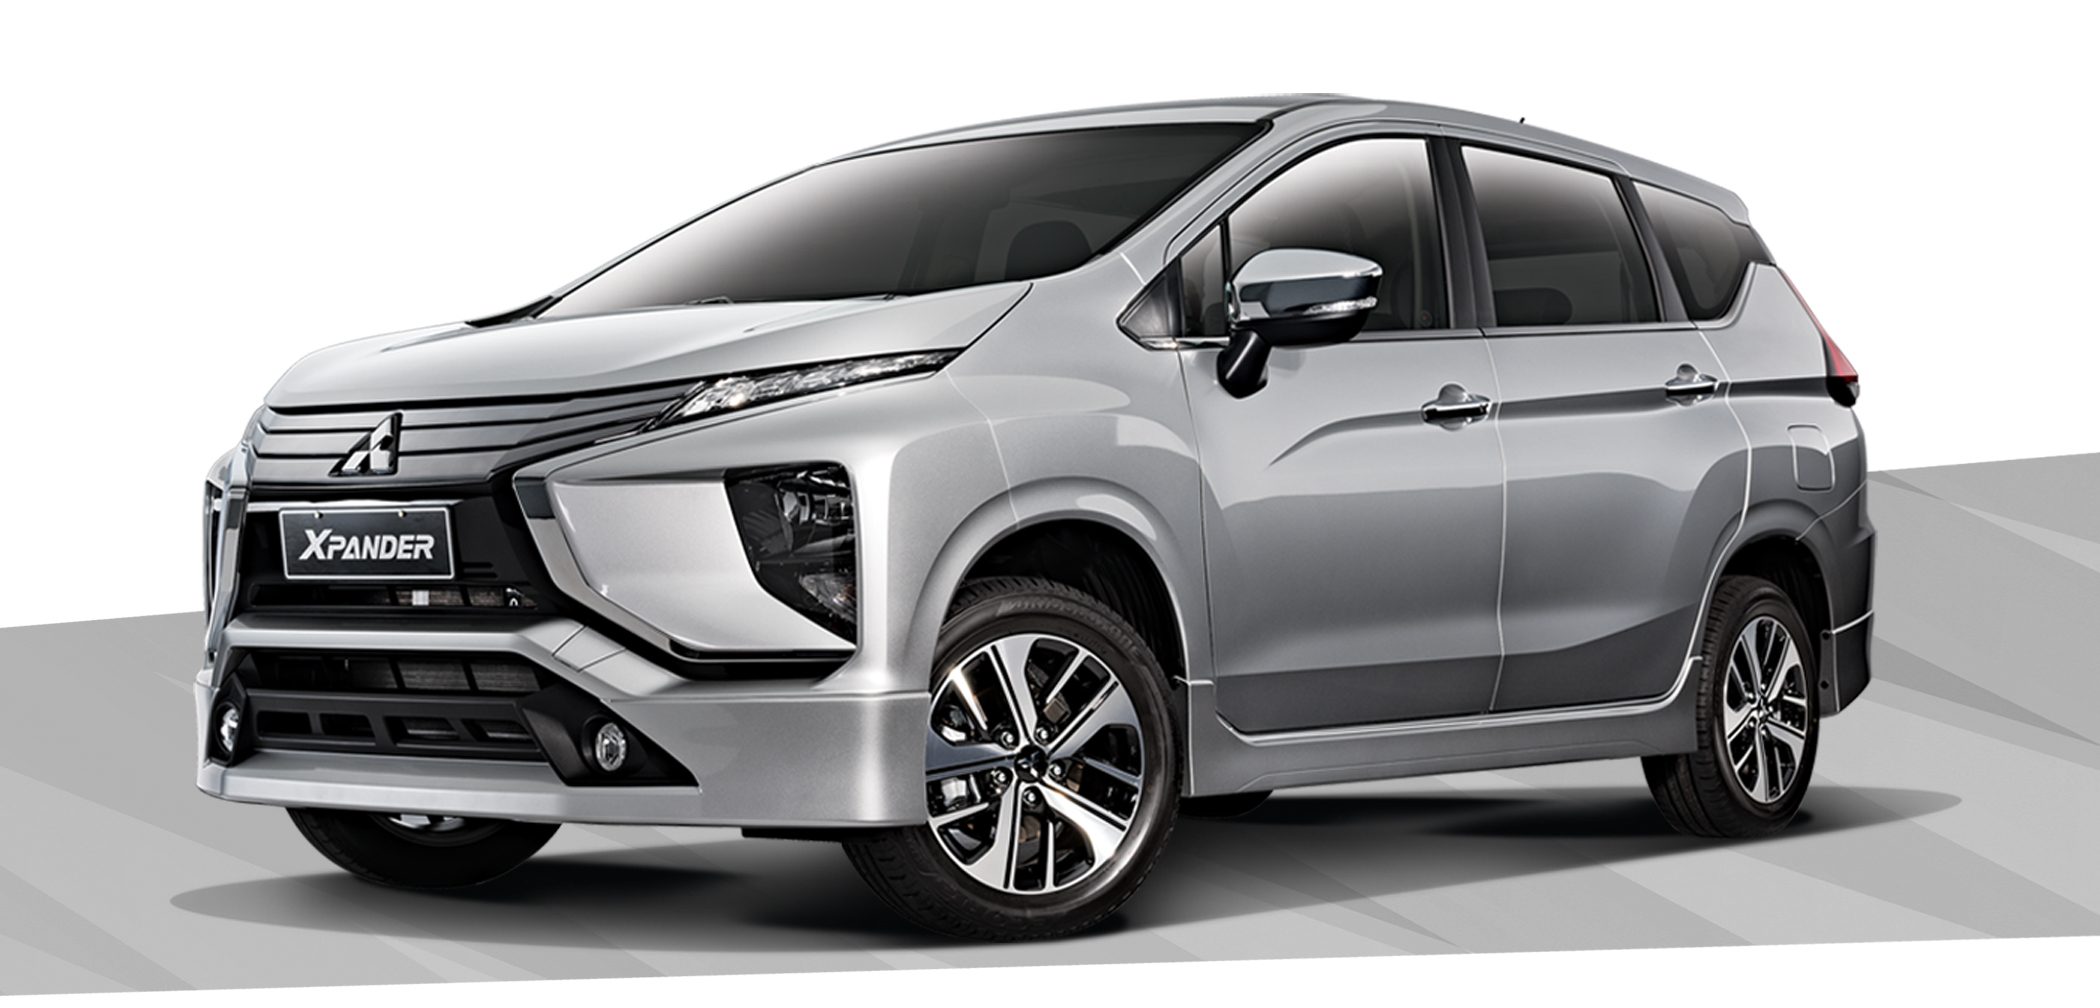 Mitsubishi XPANDER is C! Awards' Best Compact Carrier